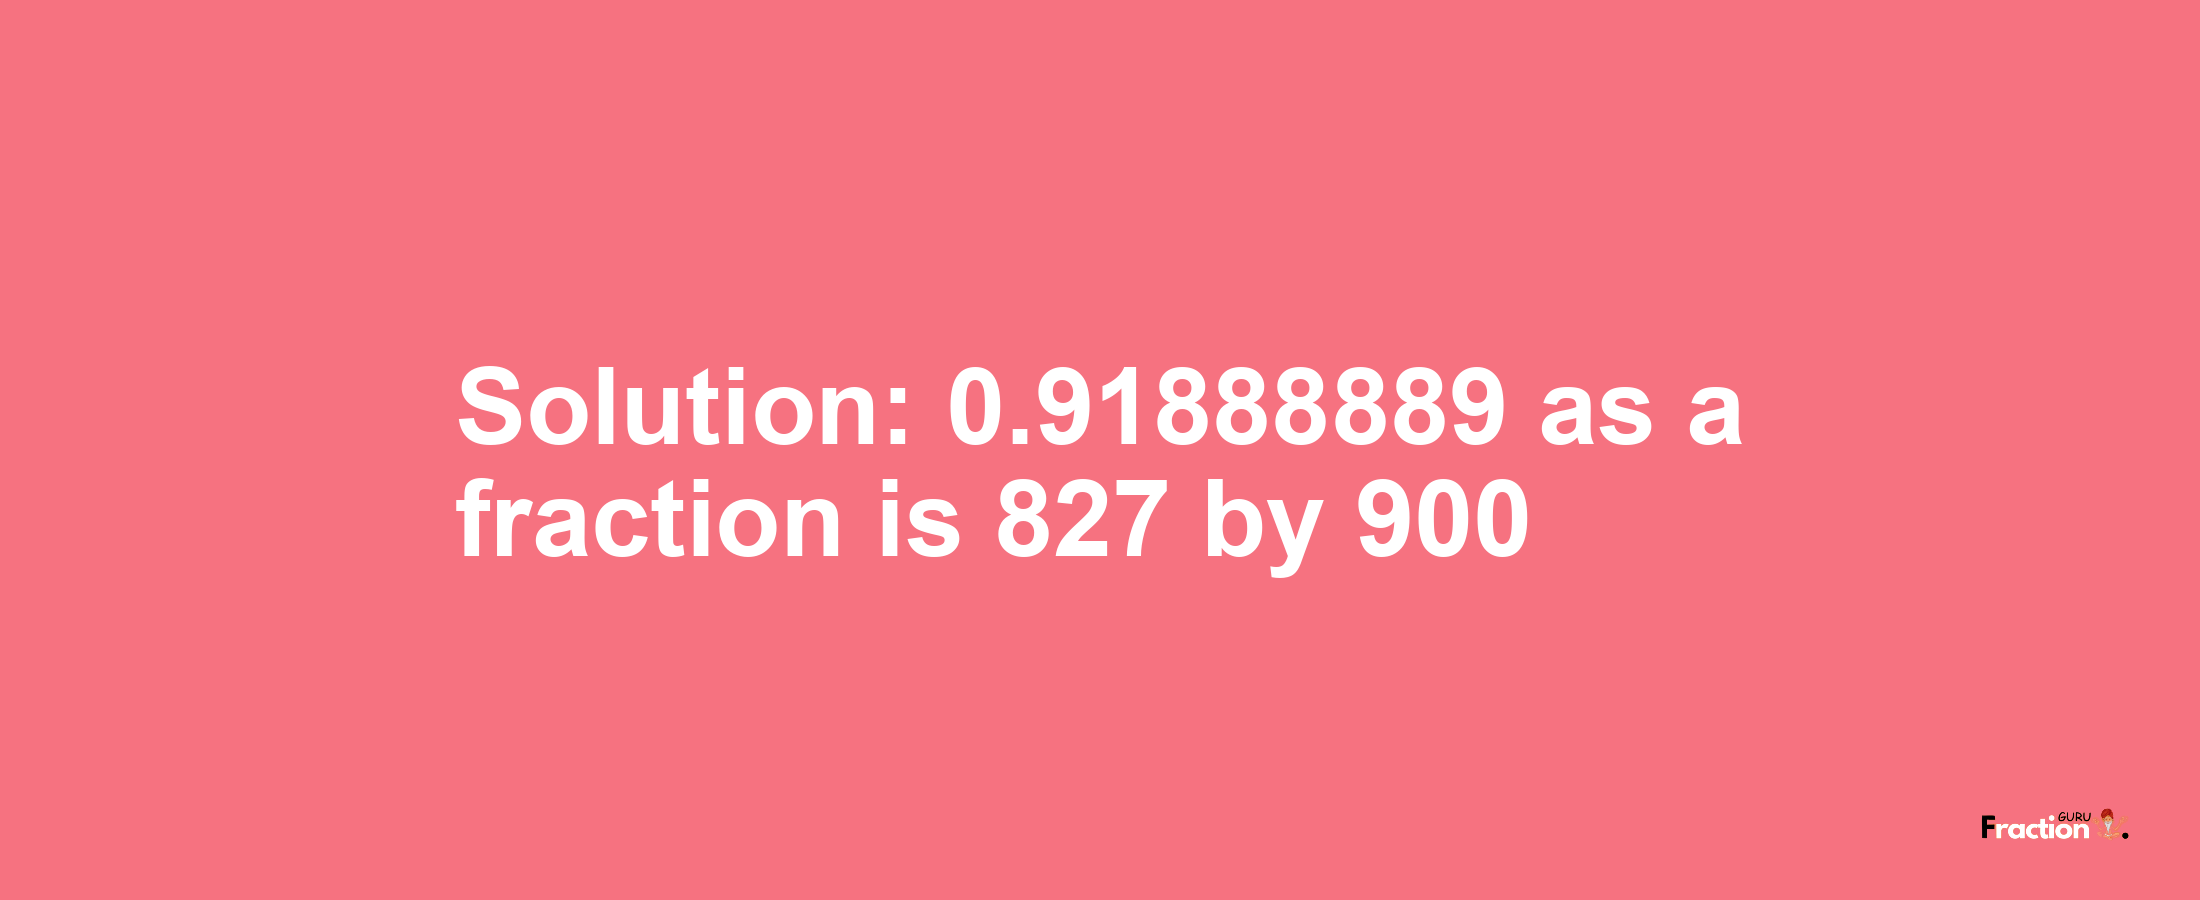 Solution:0.91888889 as a fraction is 827/900